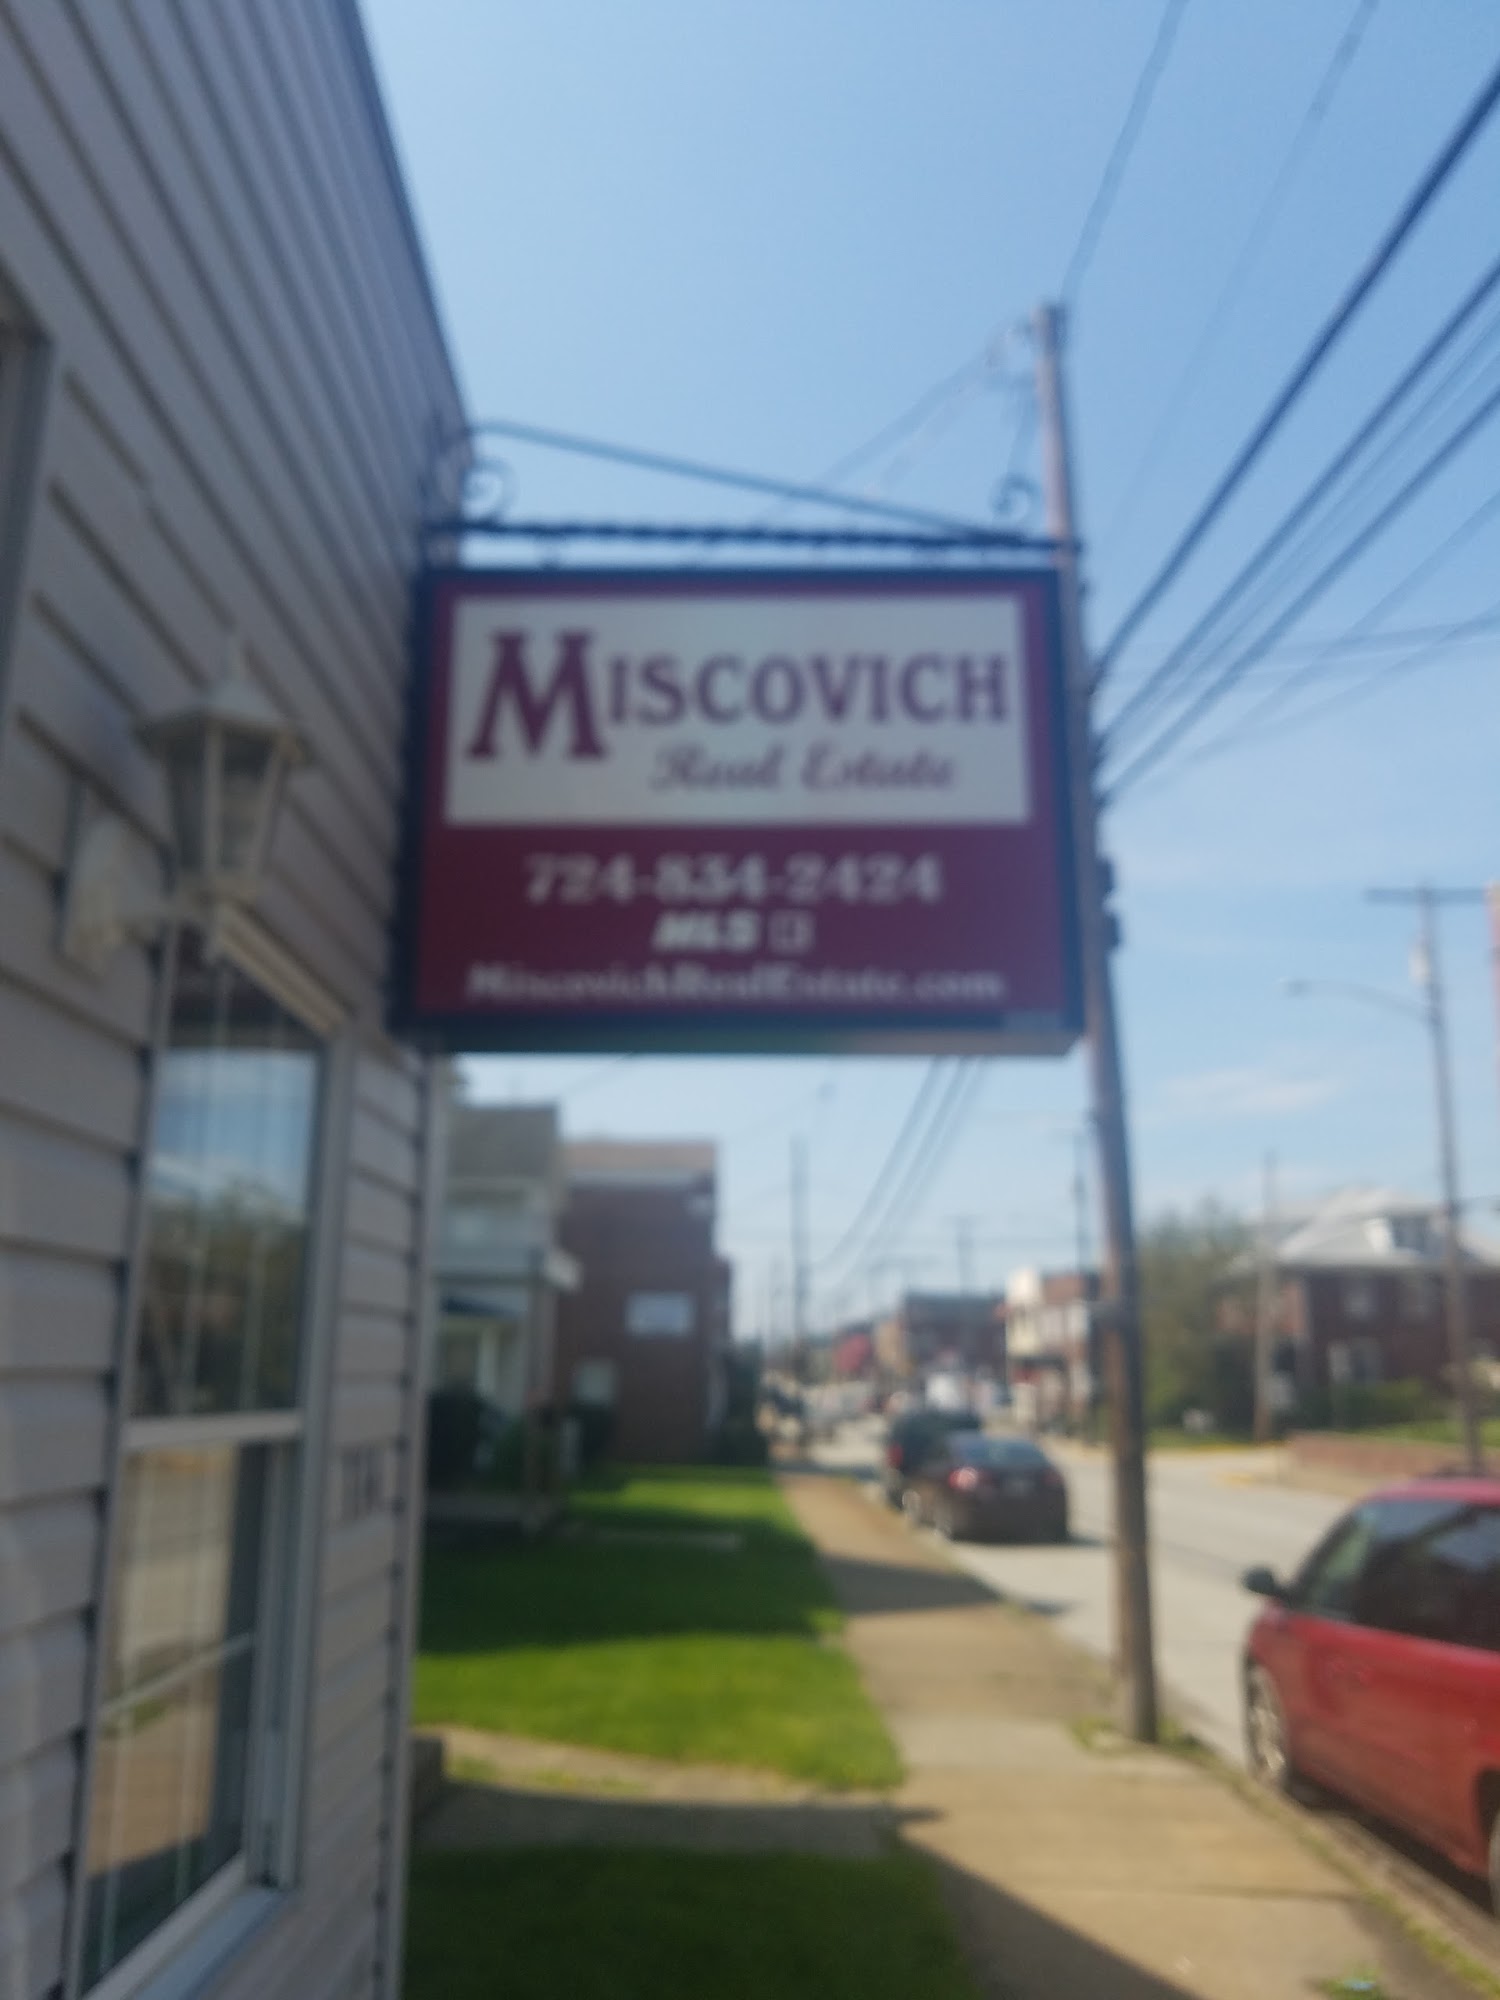 Miscovich Real Estate 114 N 4th St, Youngwood Pennsylvania 15697